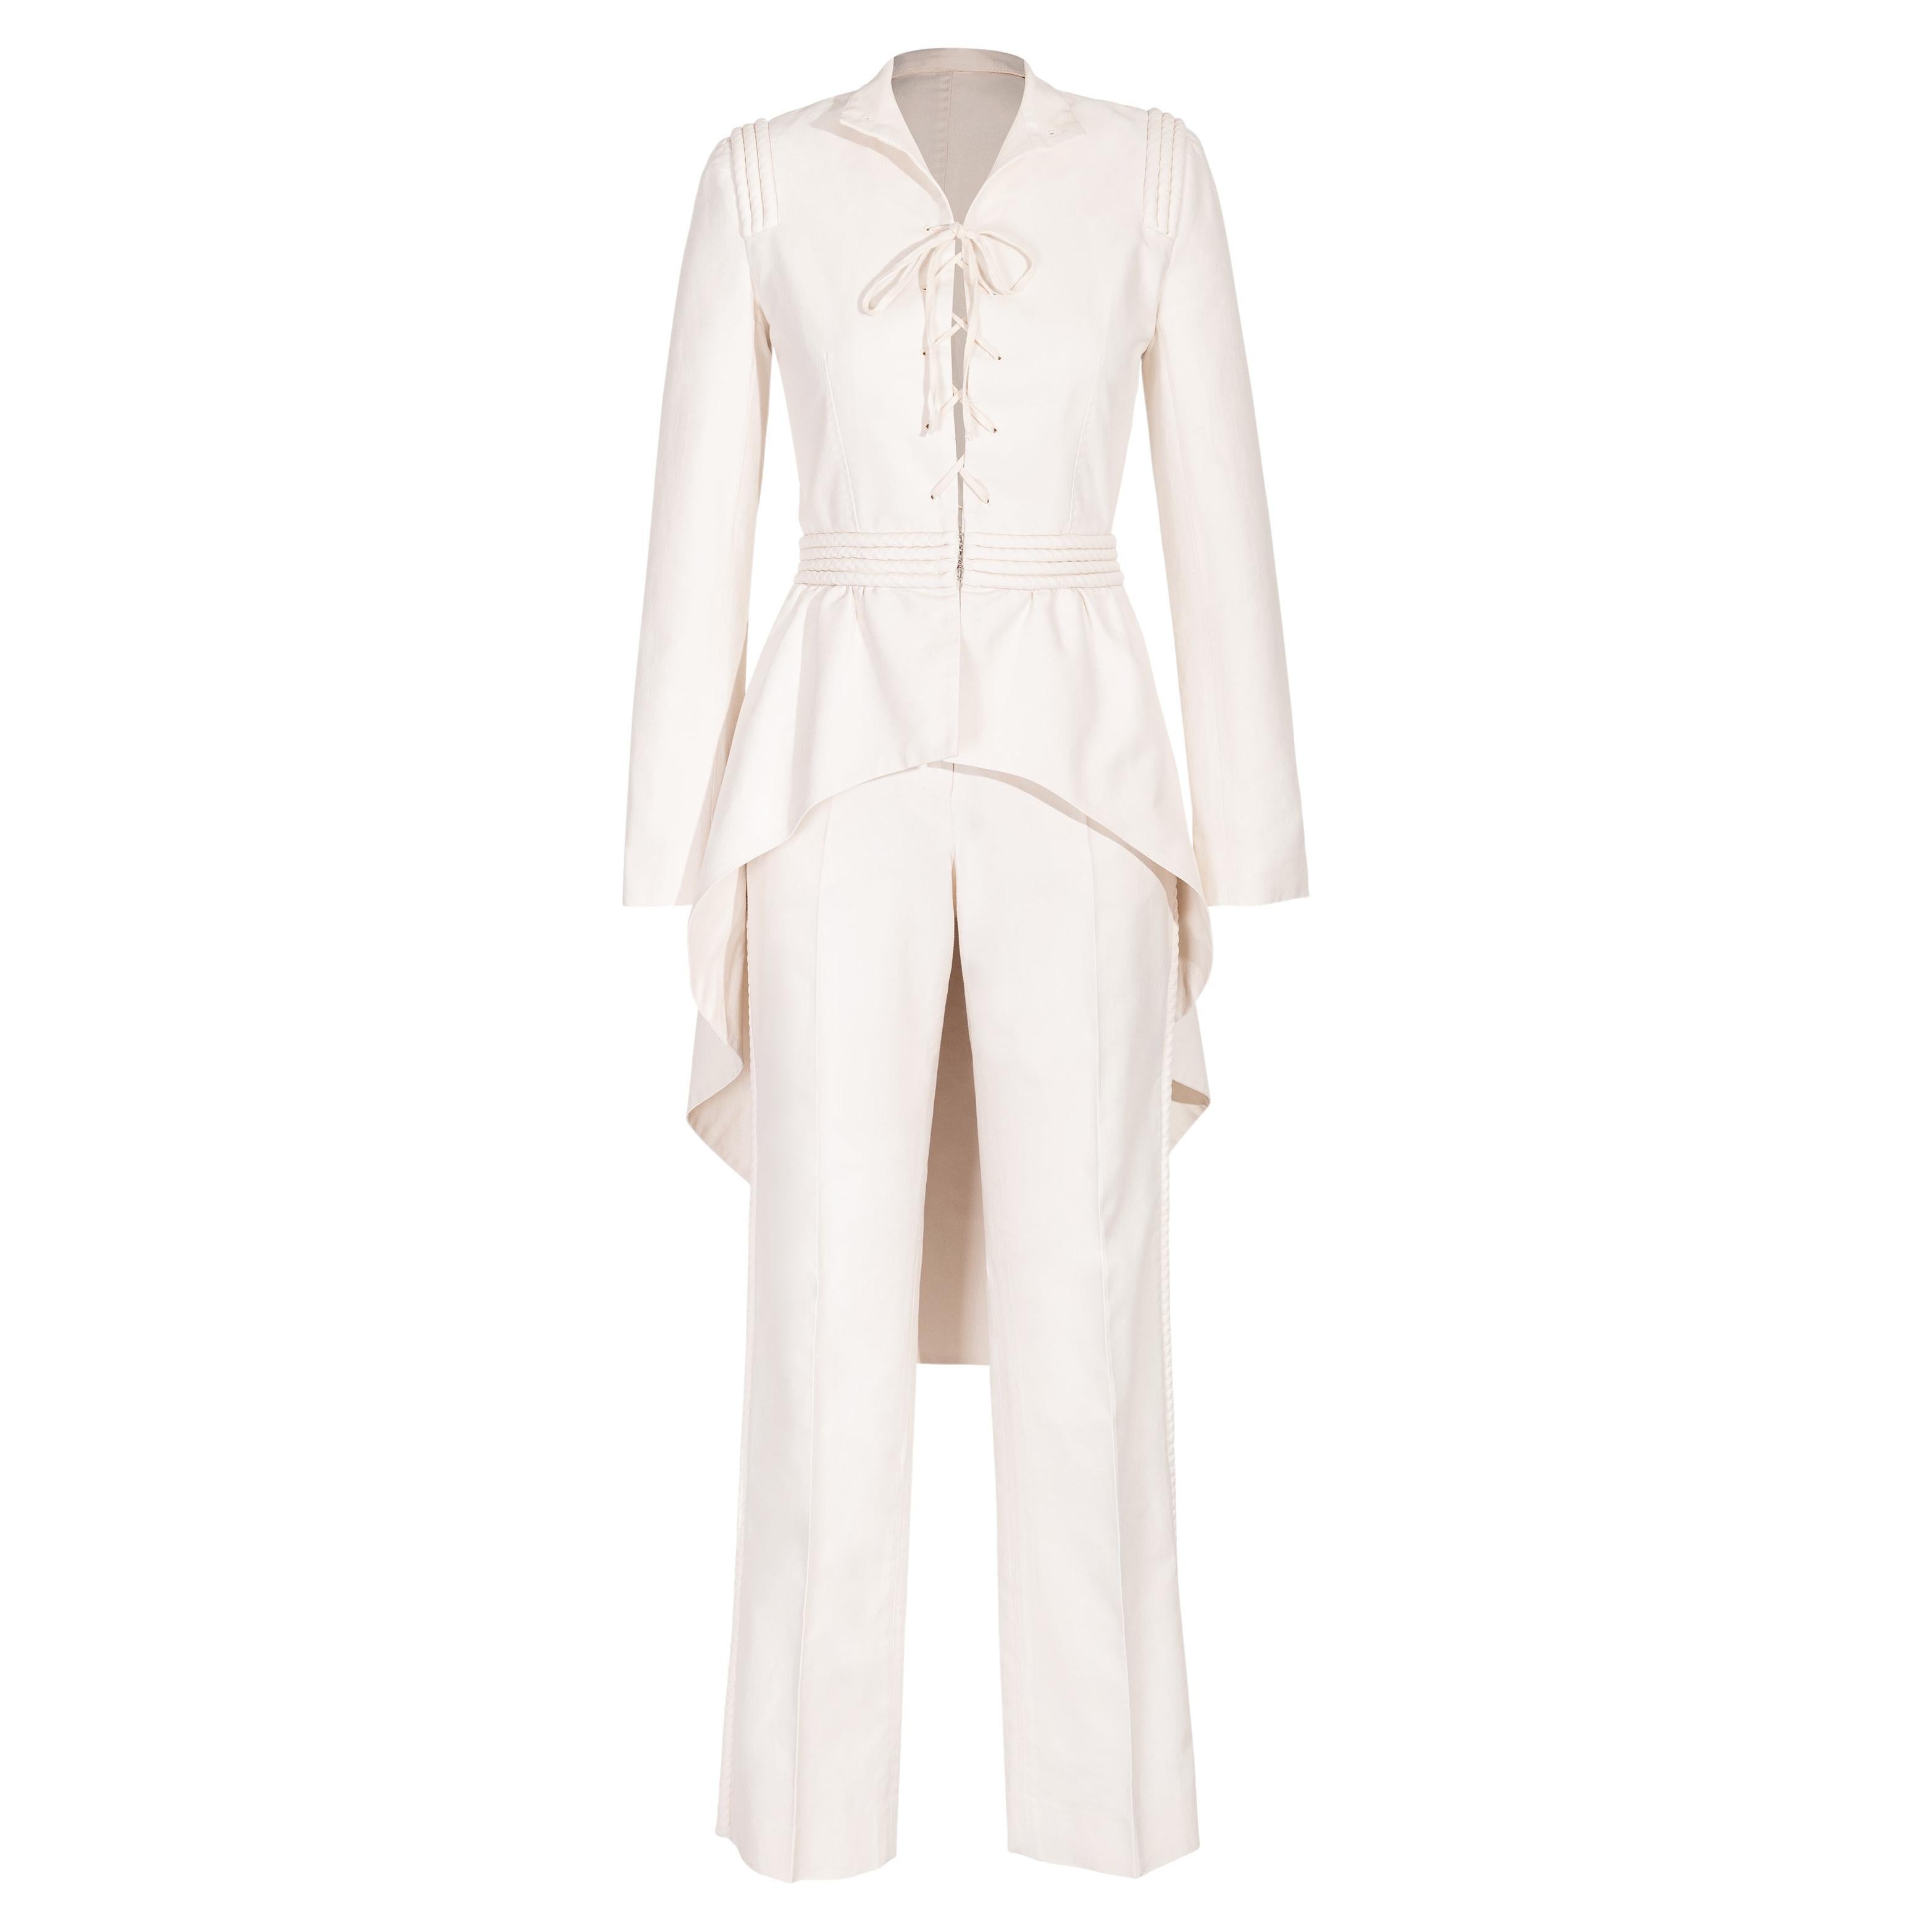 S/S 2002 Givenchy Cotton Cream High-Low Jacket and Pant Set